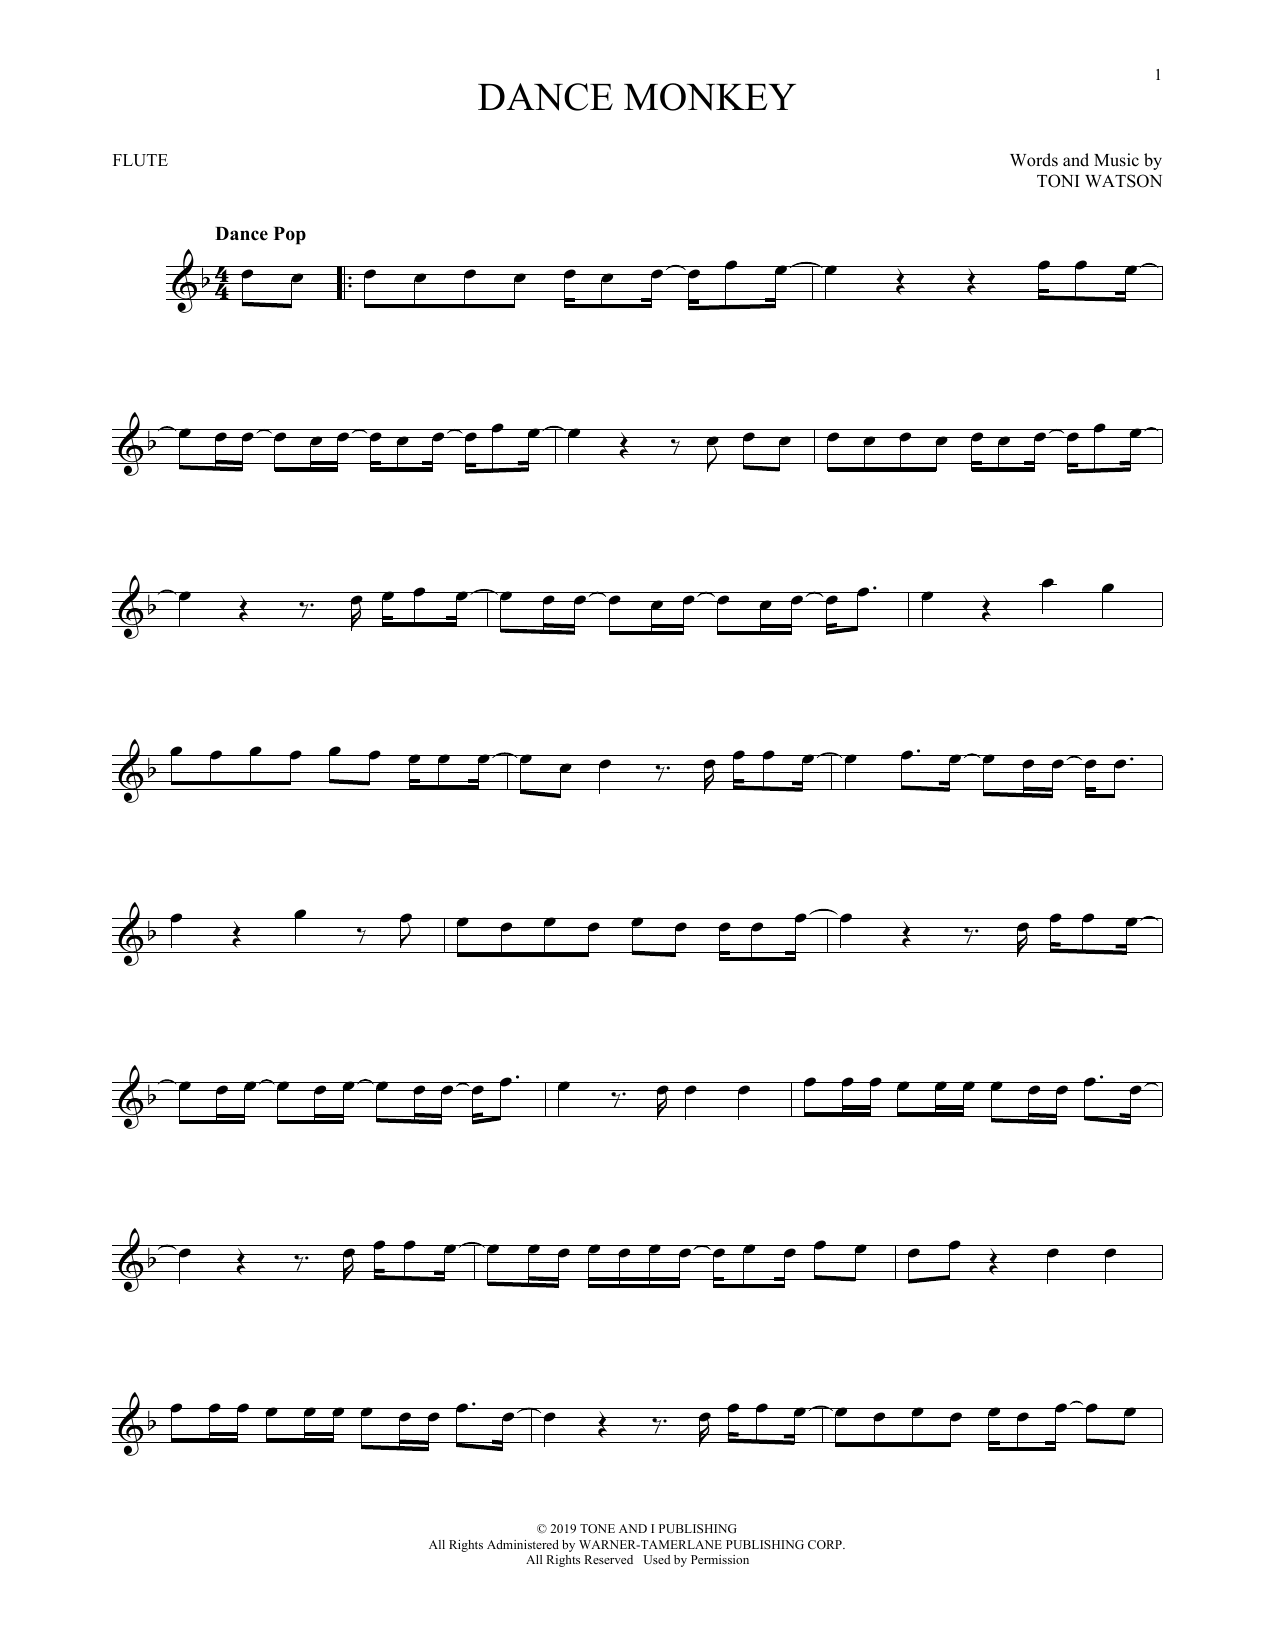 Download Tones And I Dance Monkey Sheet Music